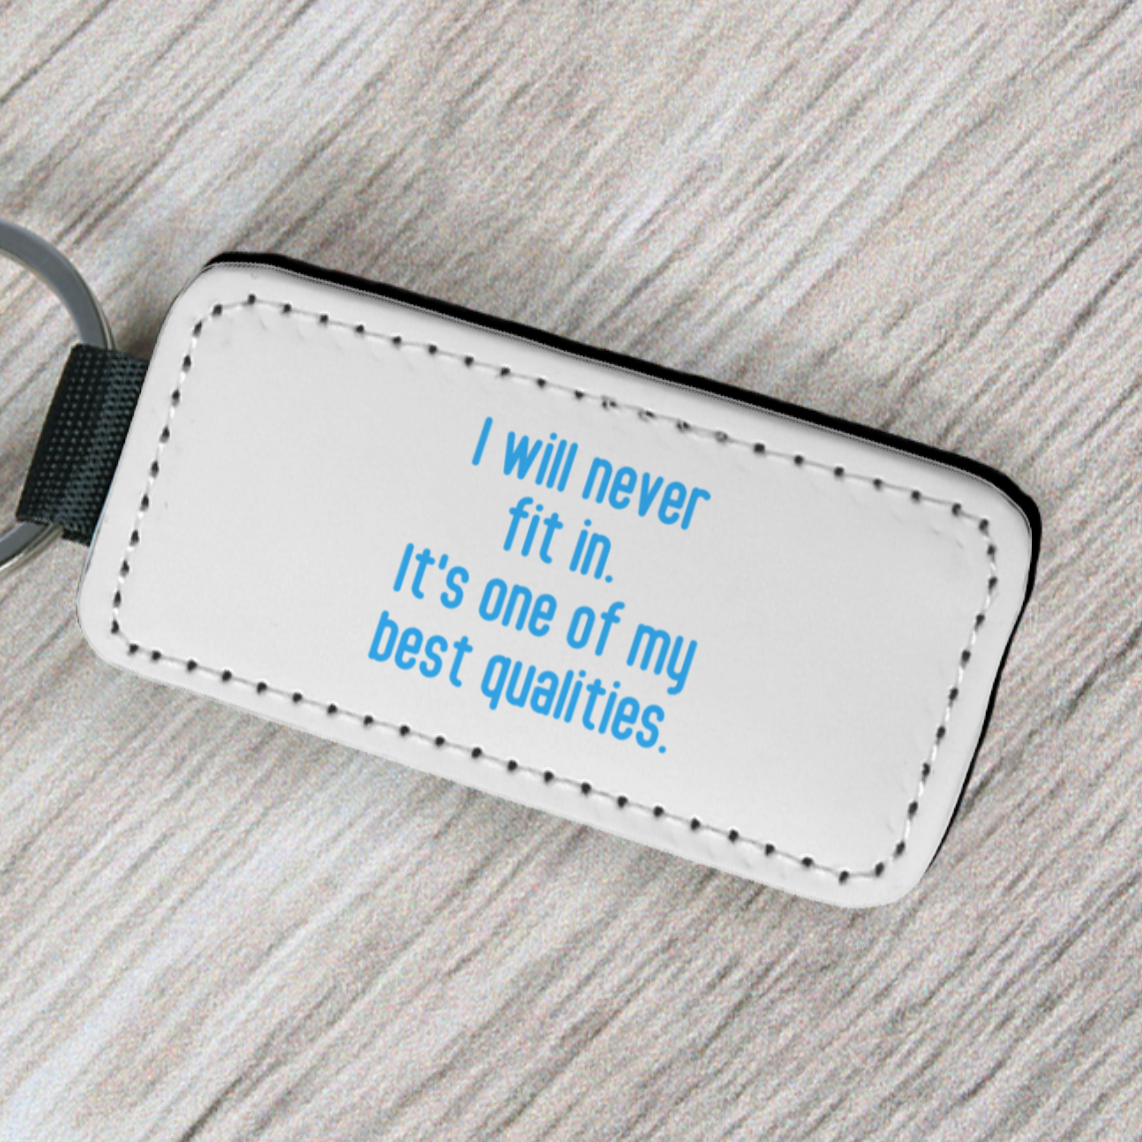 I will never fit in - Key Tag